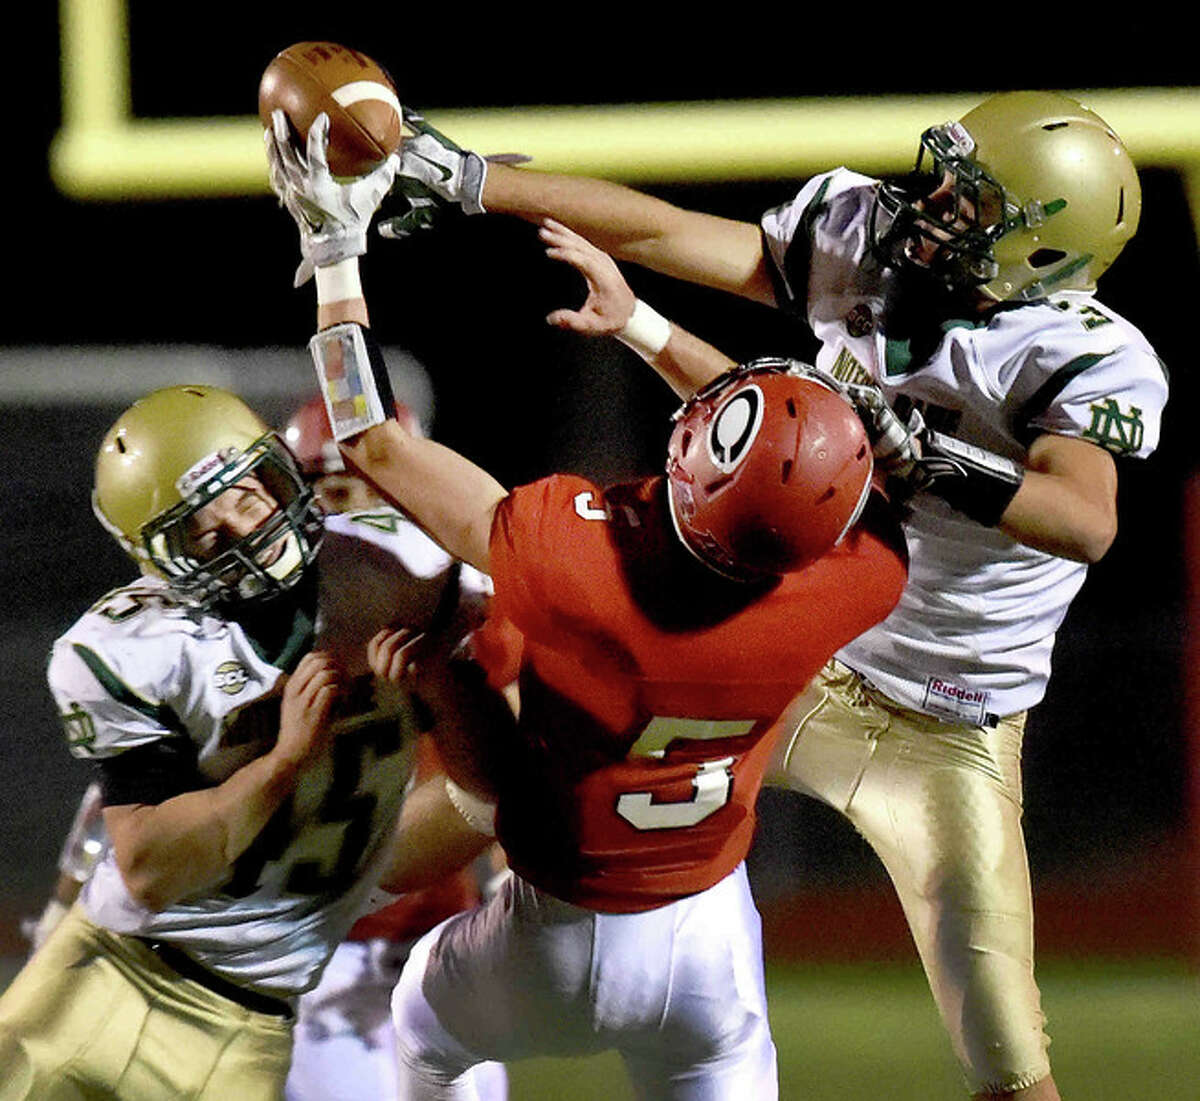 Tim Jambor, left, and teammate Nico Ragaini, right, of Notre Dame H.S. break up a pass play intended for Colin Thorne of Cheshire High School during first quarter football action at Cheshire H.S. Friday evening, October 31, 2014. (Photo by Peter Hvizdak)